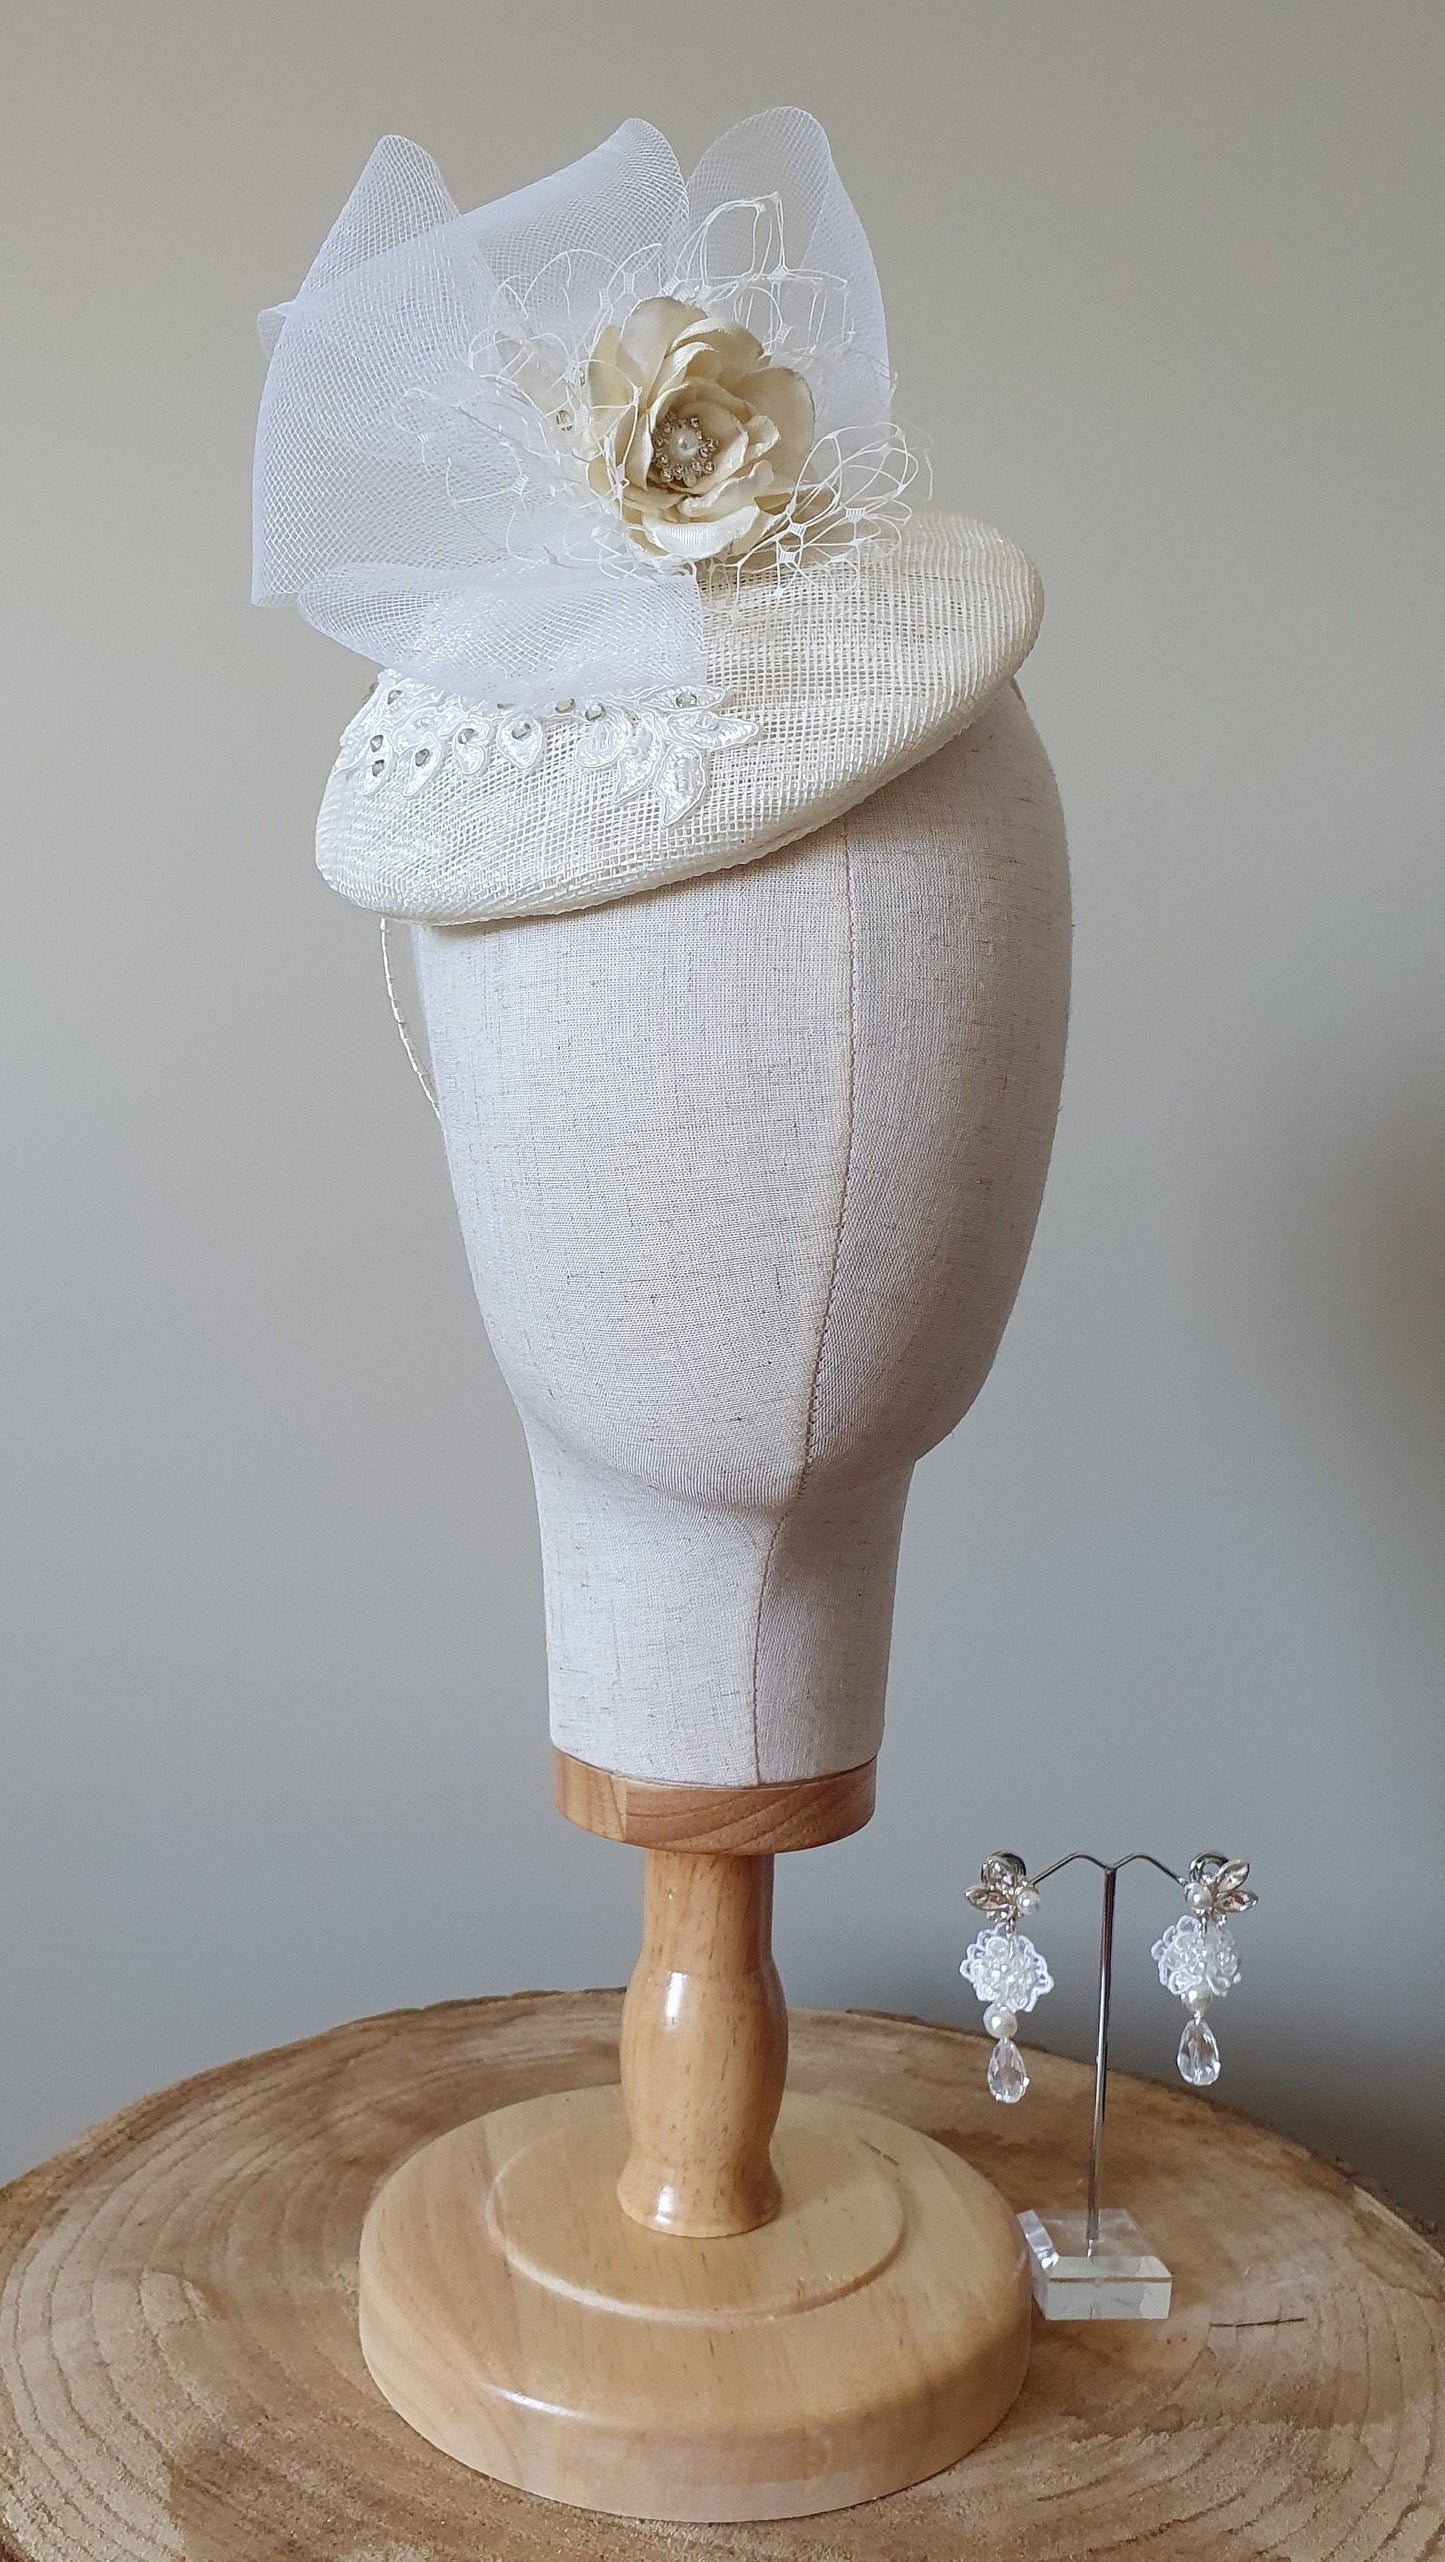 Fascinator handmade in ivory sinamay with white, bridal headdress - Perfect for weddings and festive occasions